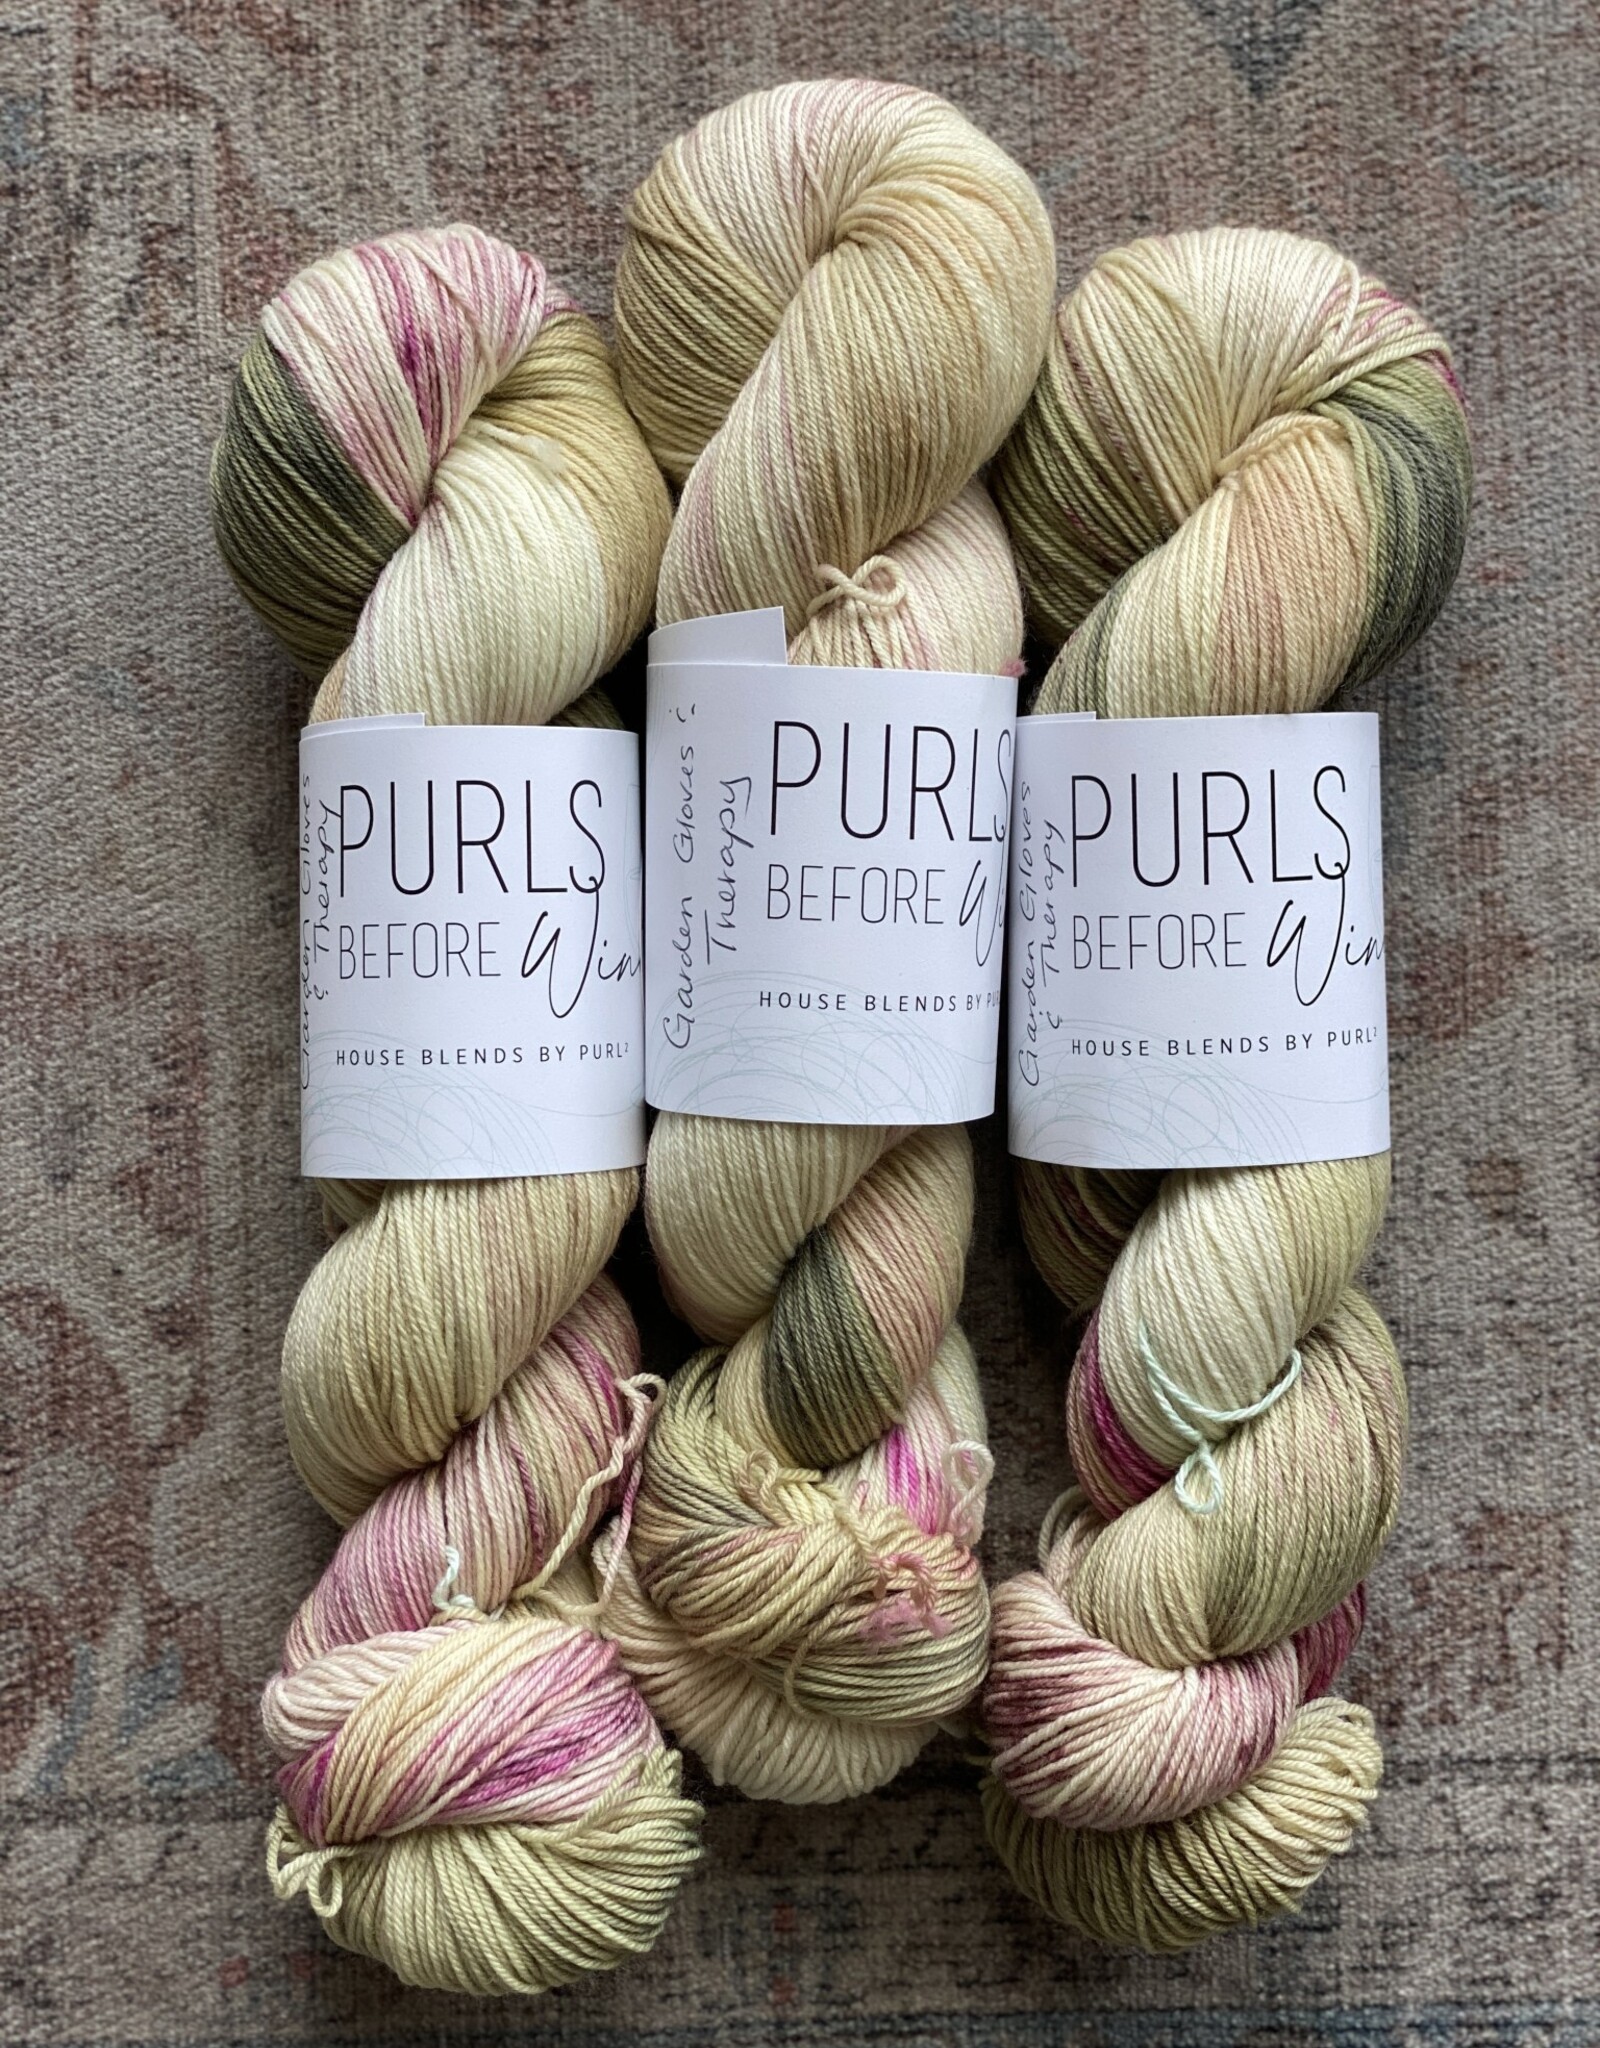 Purls Before Wine Robusta Garden Gloves & Therapy